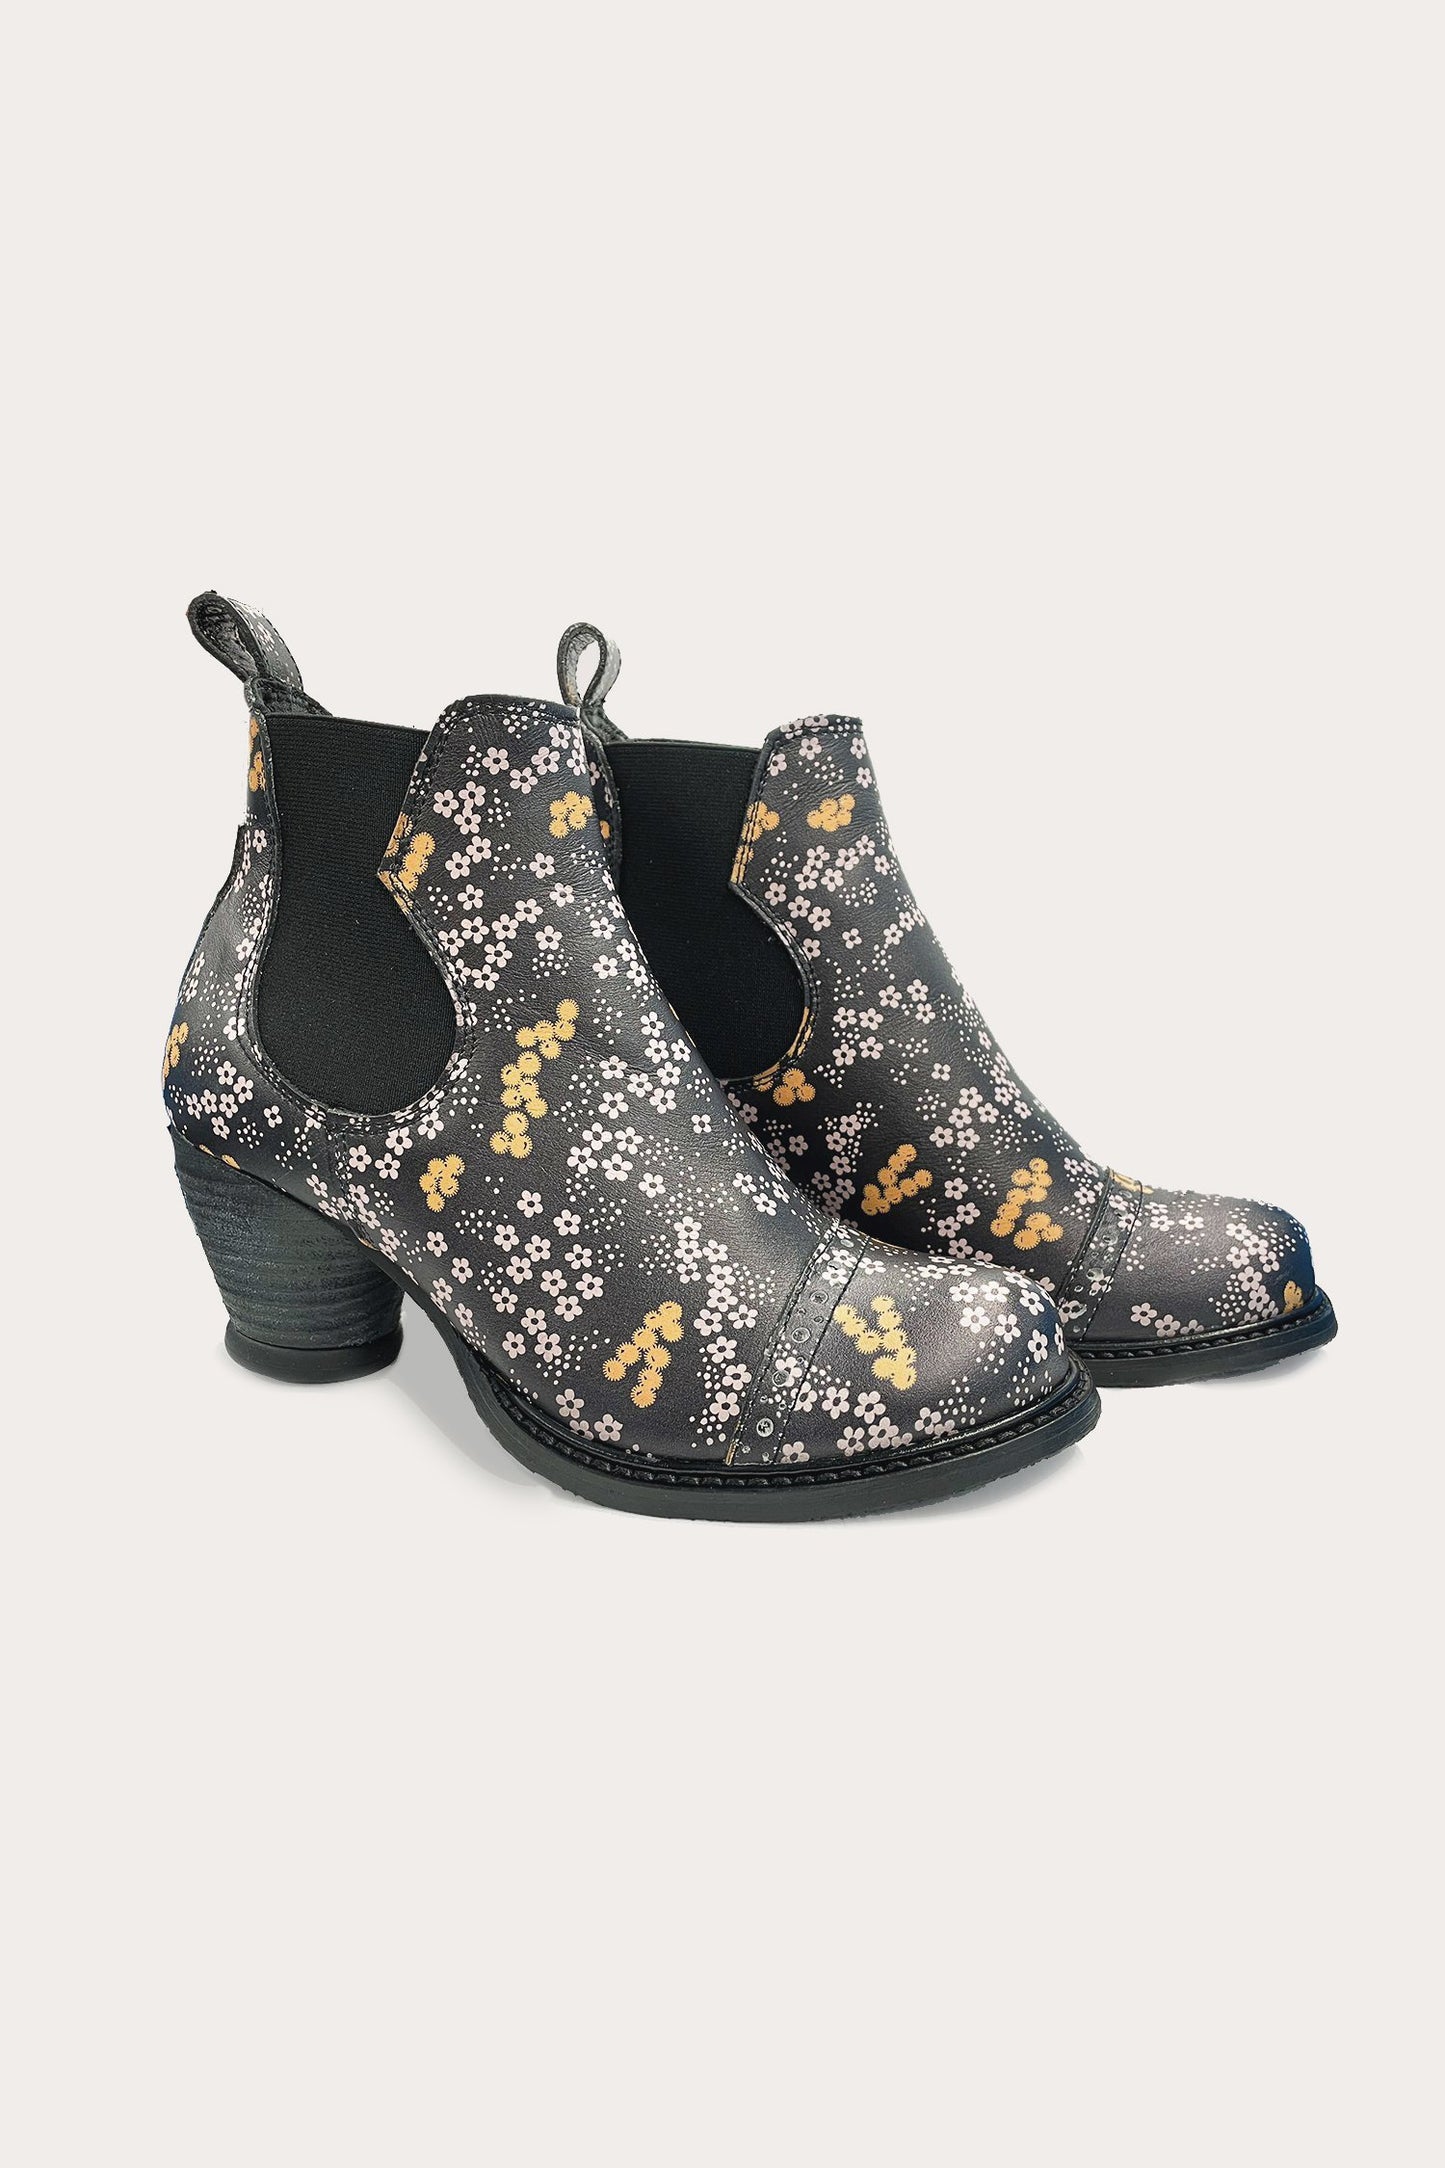 Ditsy Blooms Boot, black high heel, white/yellow floral design, black side elastic, ankles high